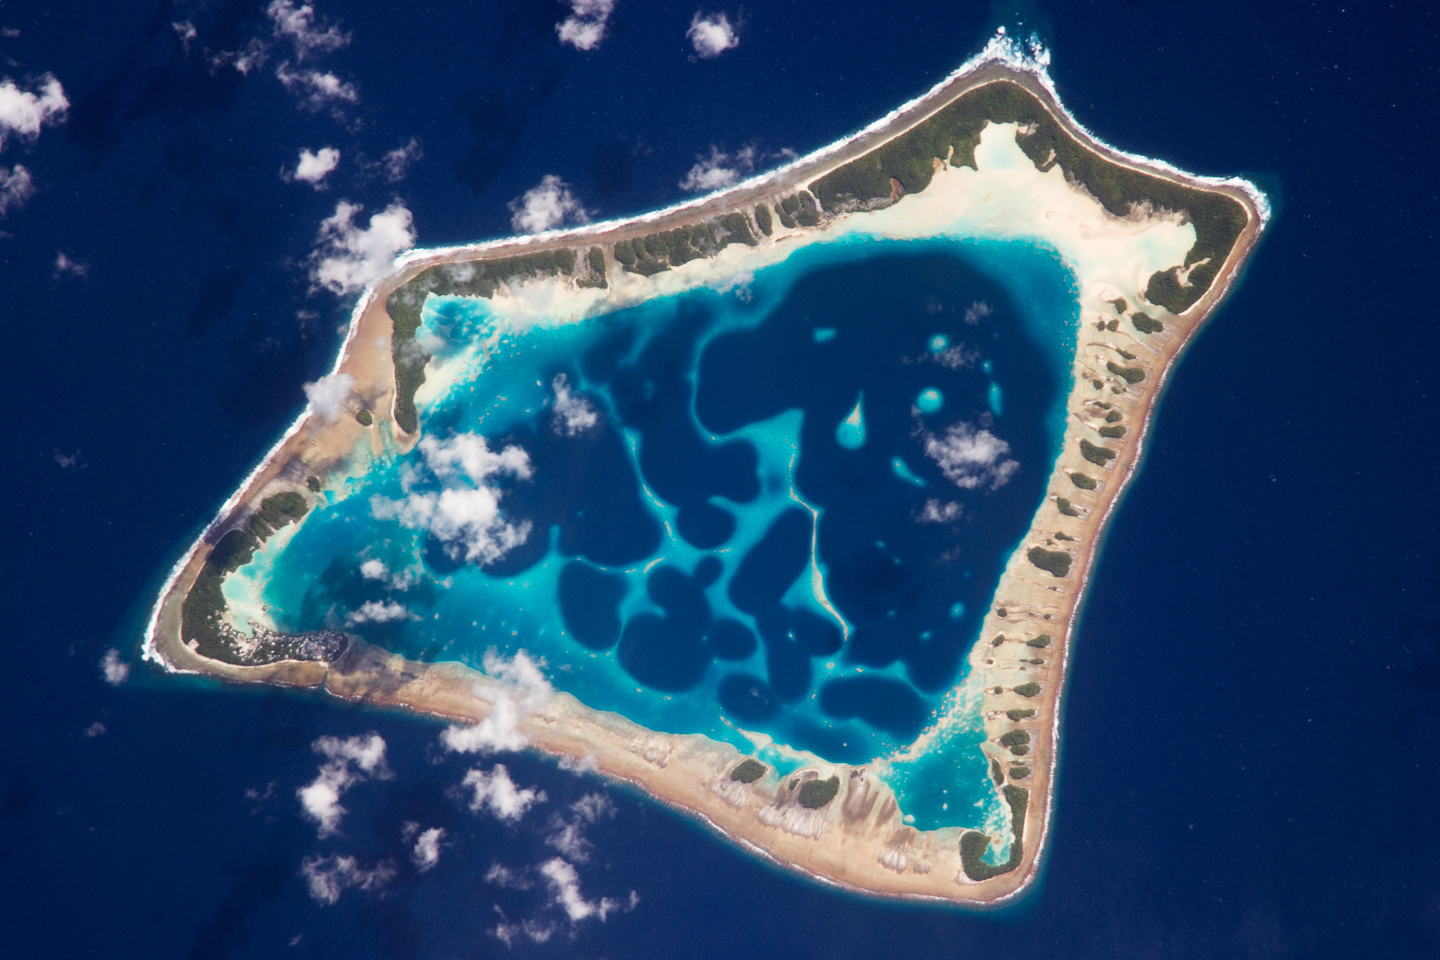 Atafu Atoll. It appears to be an island that is nearly covered in a lake. There is just a thin bar of sand showing above the sea.